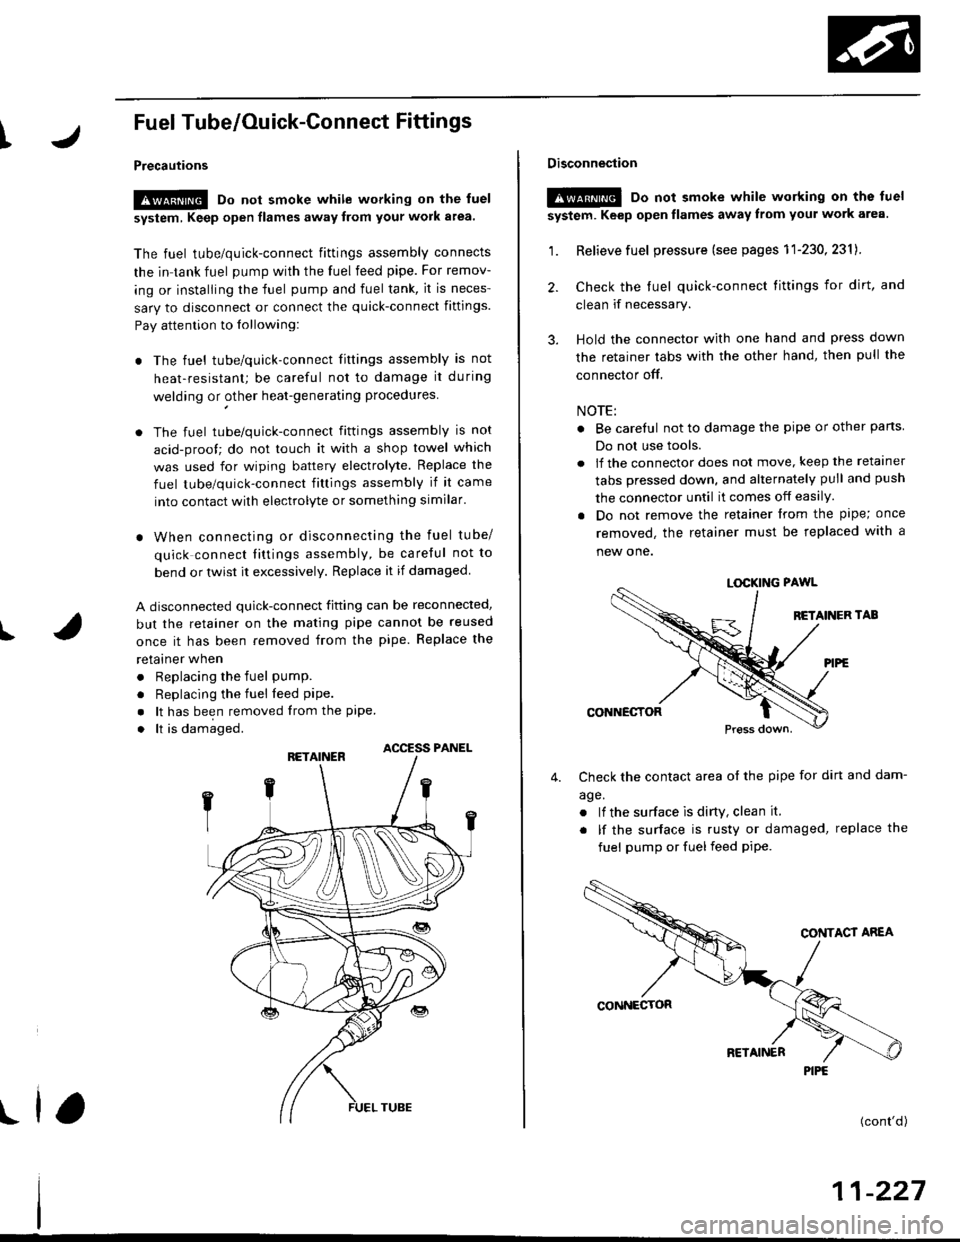 HONDA CIVIC 1998 6.G Workshop Manual I
Fuel Tube/Ouick-Gonnect Fittings
Precautions
!@ Do not smoke while working on the fuel
system, Keep open flames away from your work a.ea
The fuel tube/quick-connect fittings assembly connects
the i